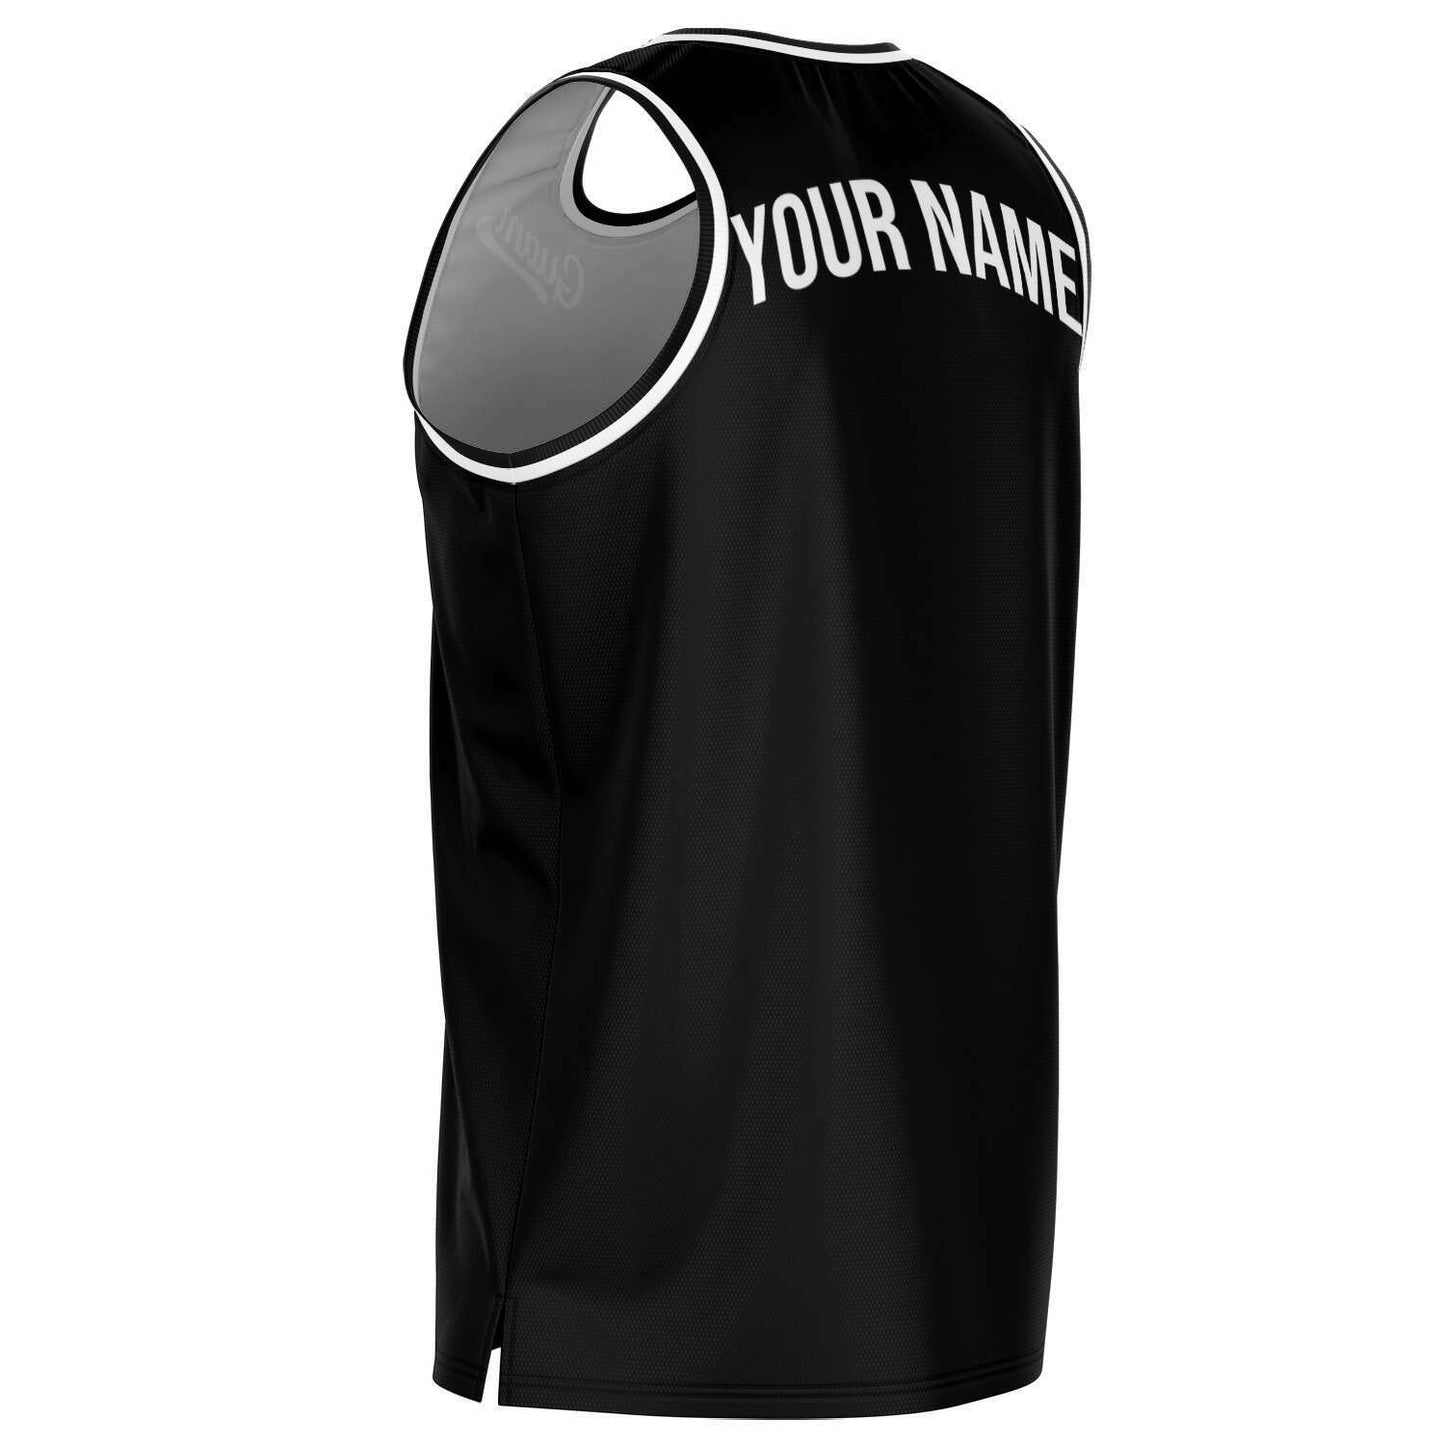 Guam Seal Black Basketball Jersey with Personalization